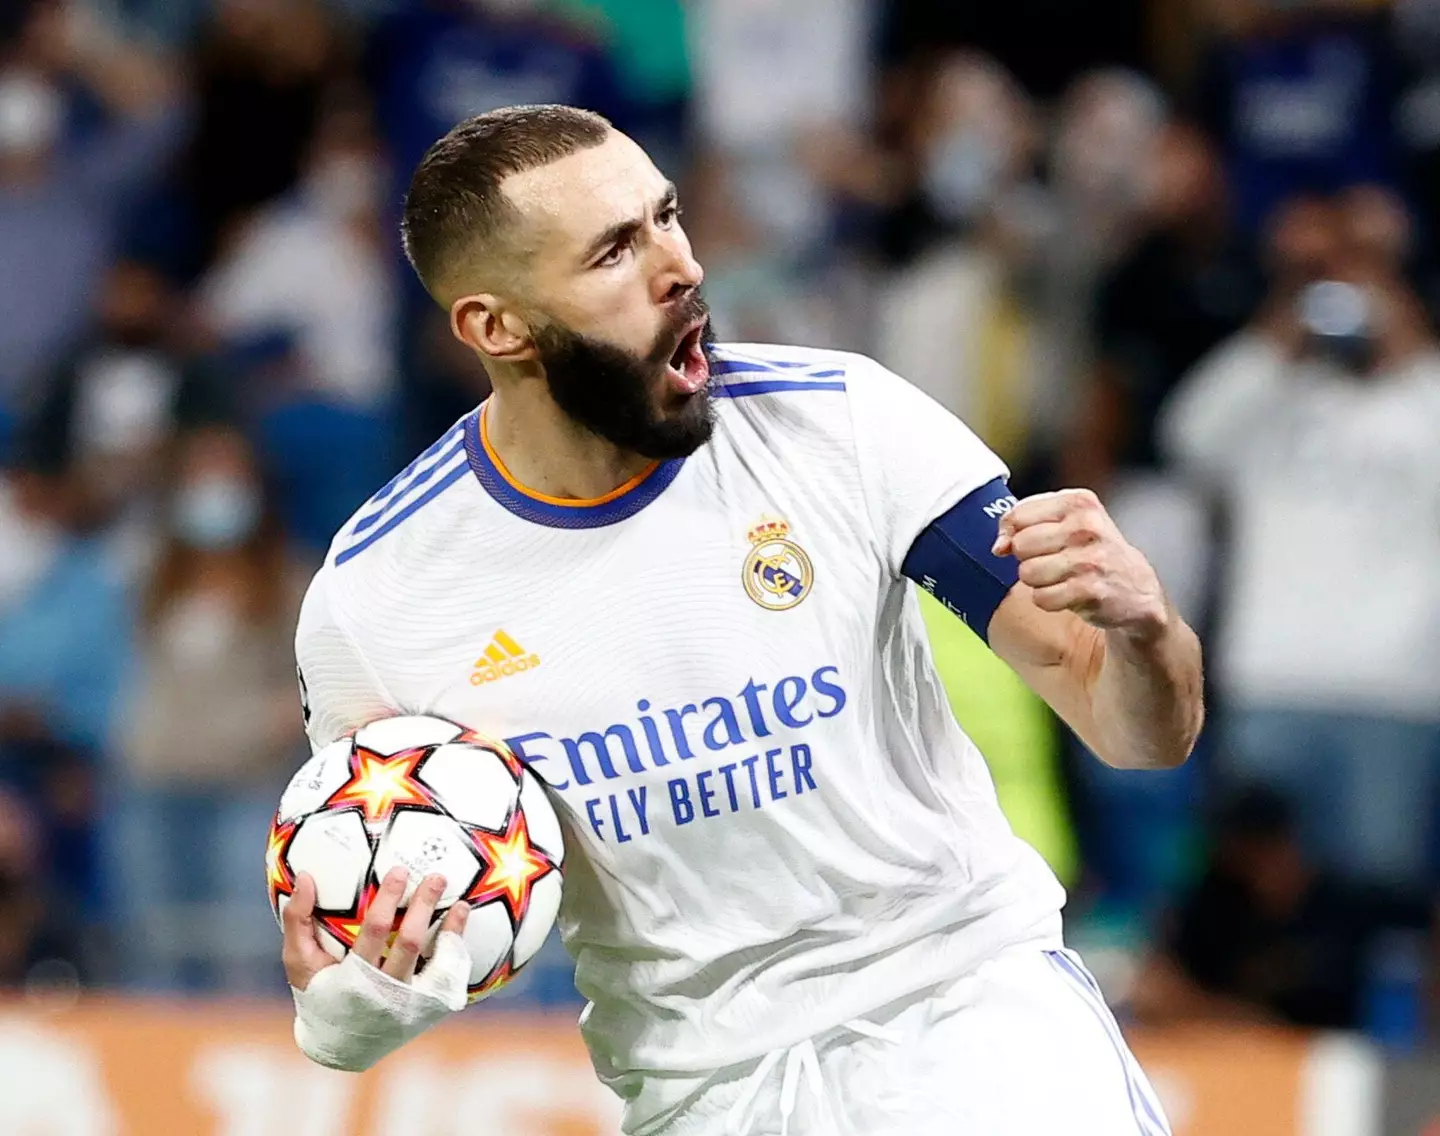 Karim Benzema has been in fine form this season in the Champions League. Image